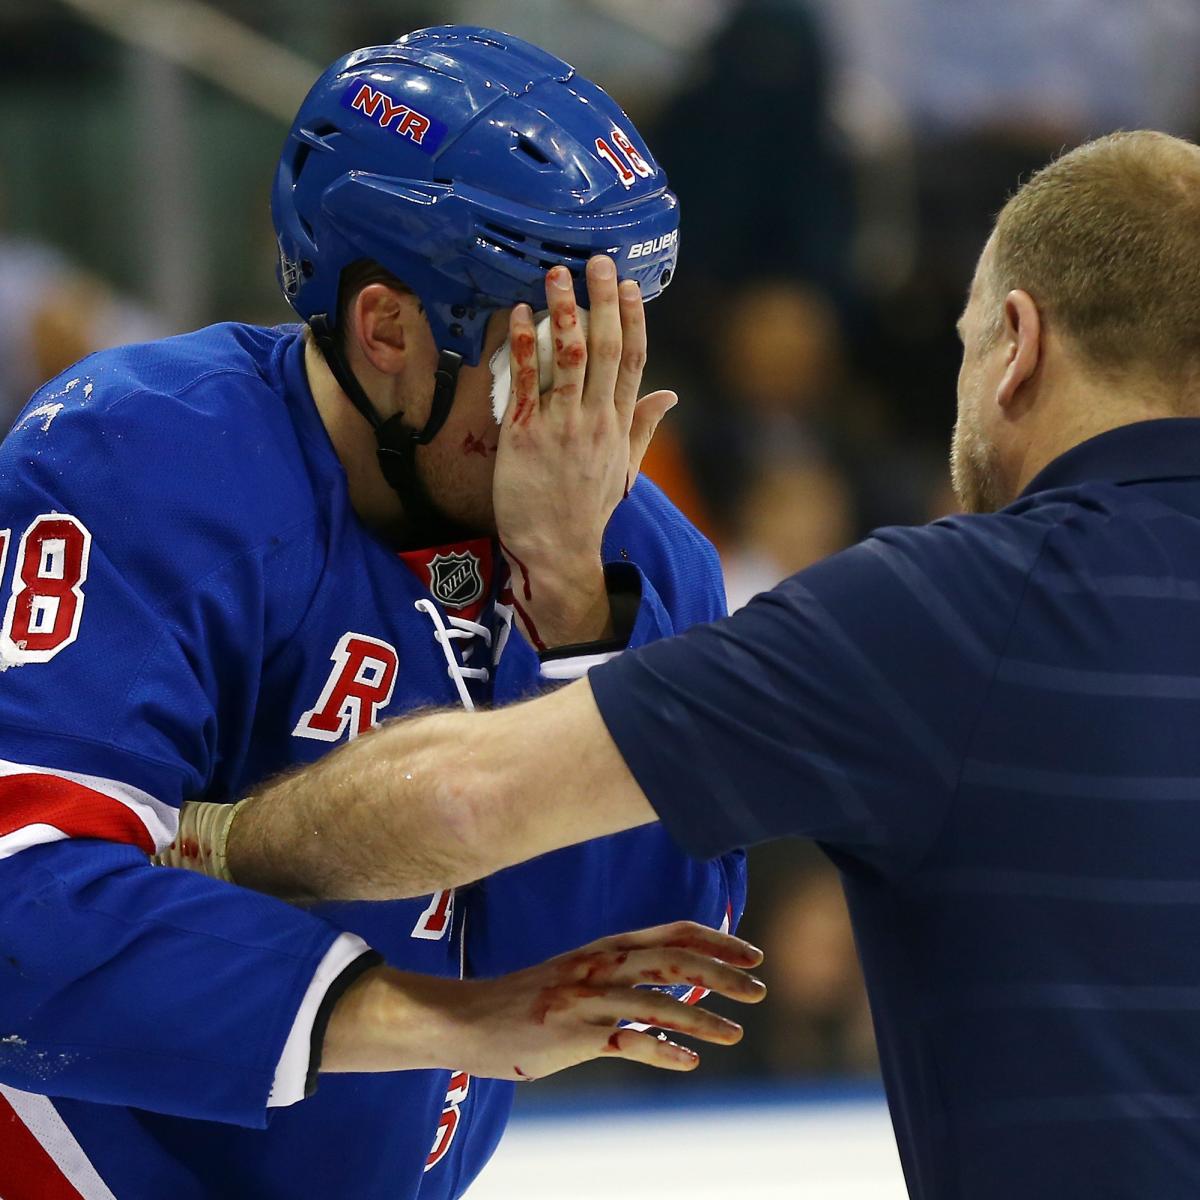 Marc Staal of New York Rangers leaves game after taking puck to eye - ESPN